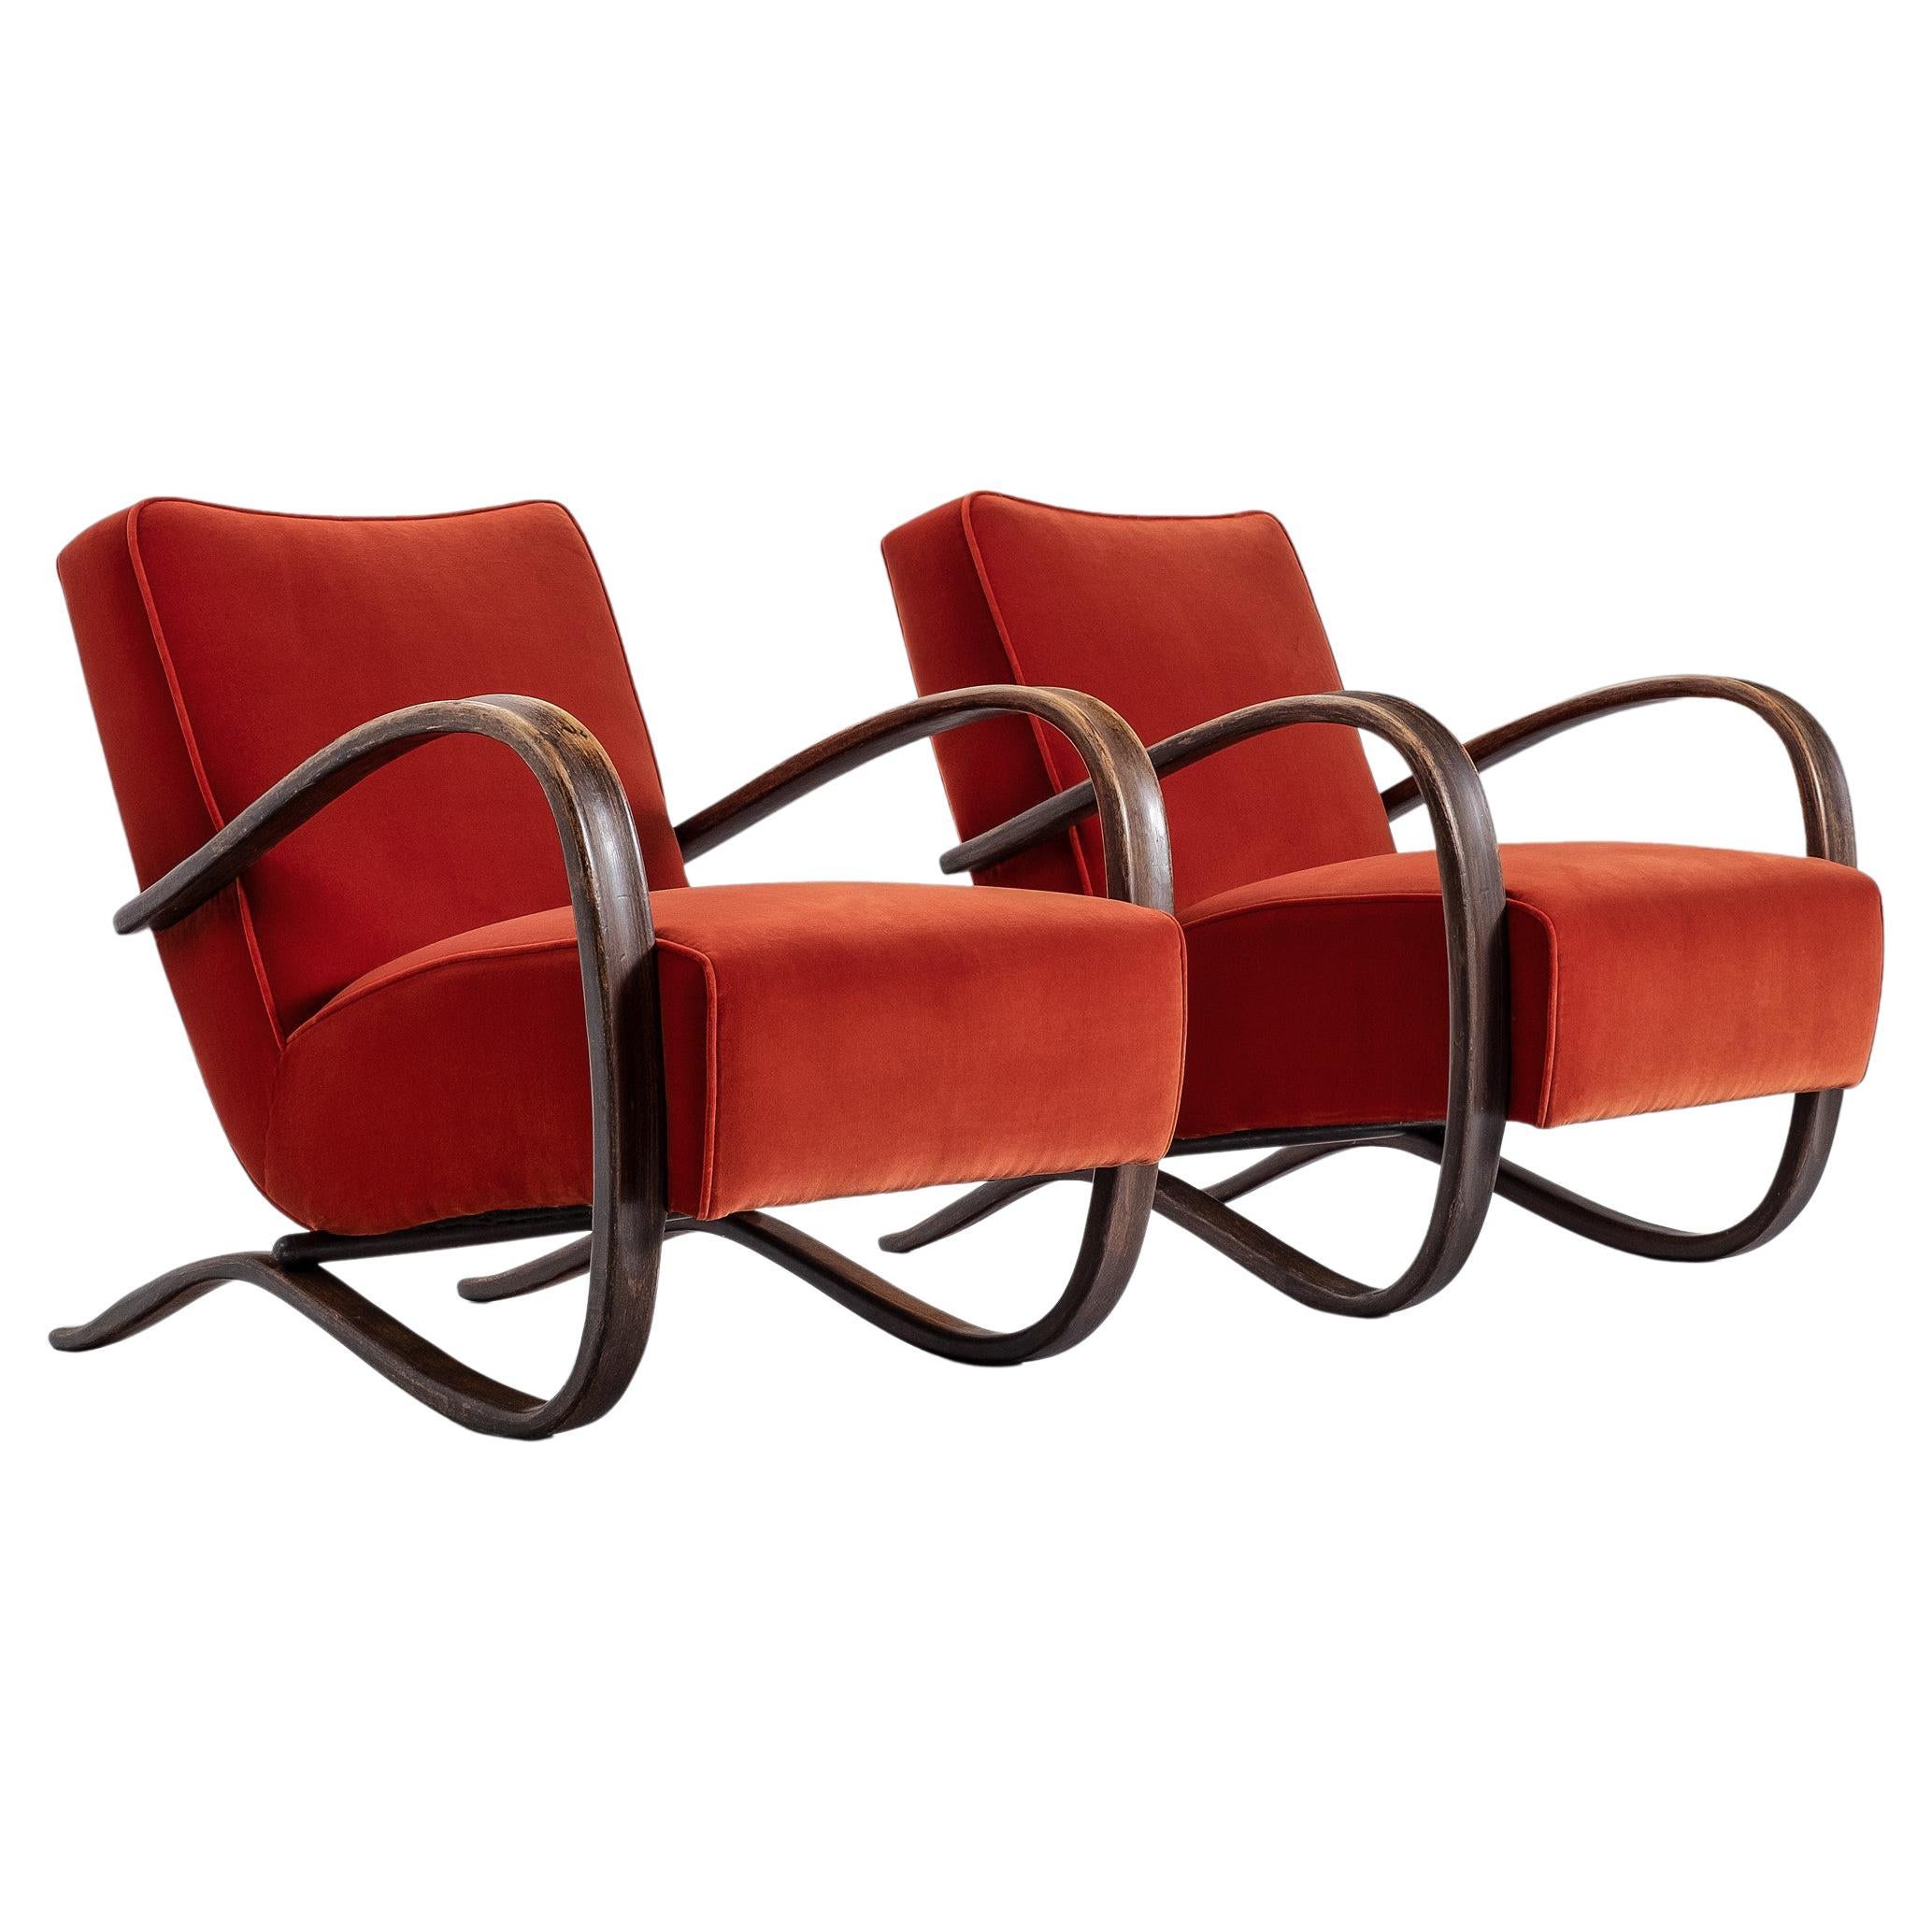 Jindrich Halabala Lounge Chairs in Red Velvet Upholstery